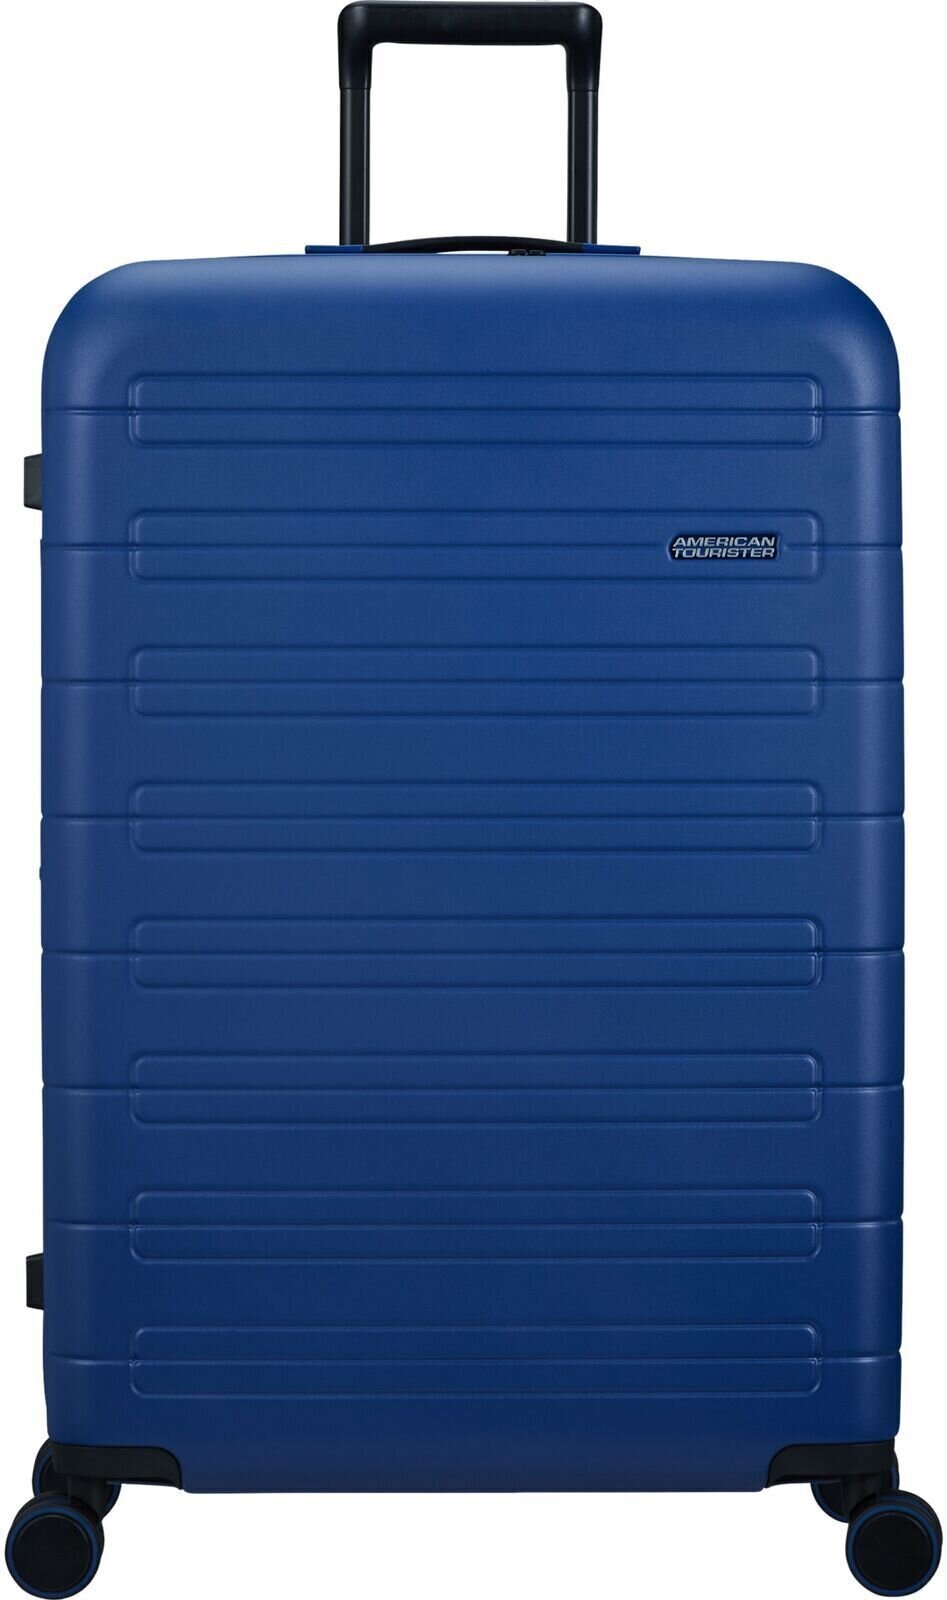 Lifestyle plecak / Torba American Tourister Novastream Spinner EXP 77/28 Large Check-in Navy Blue 103/121 L Bagaż